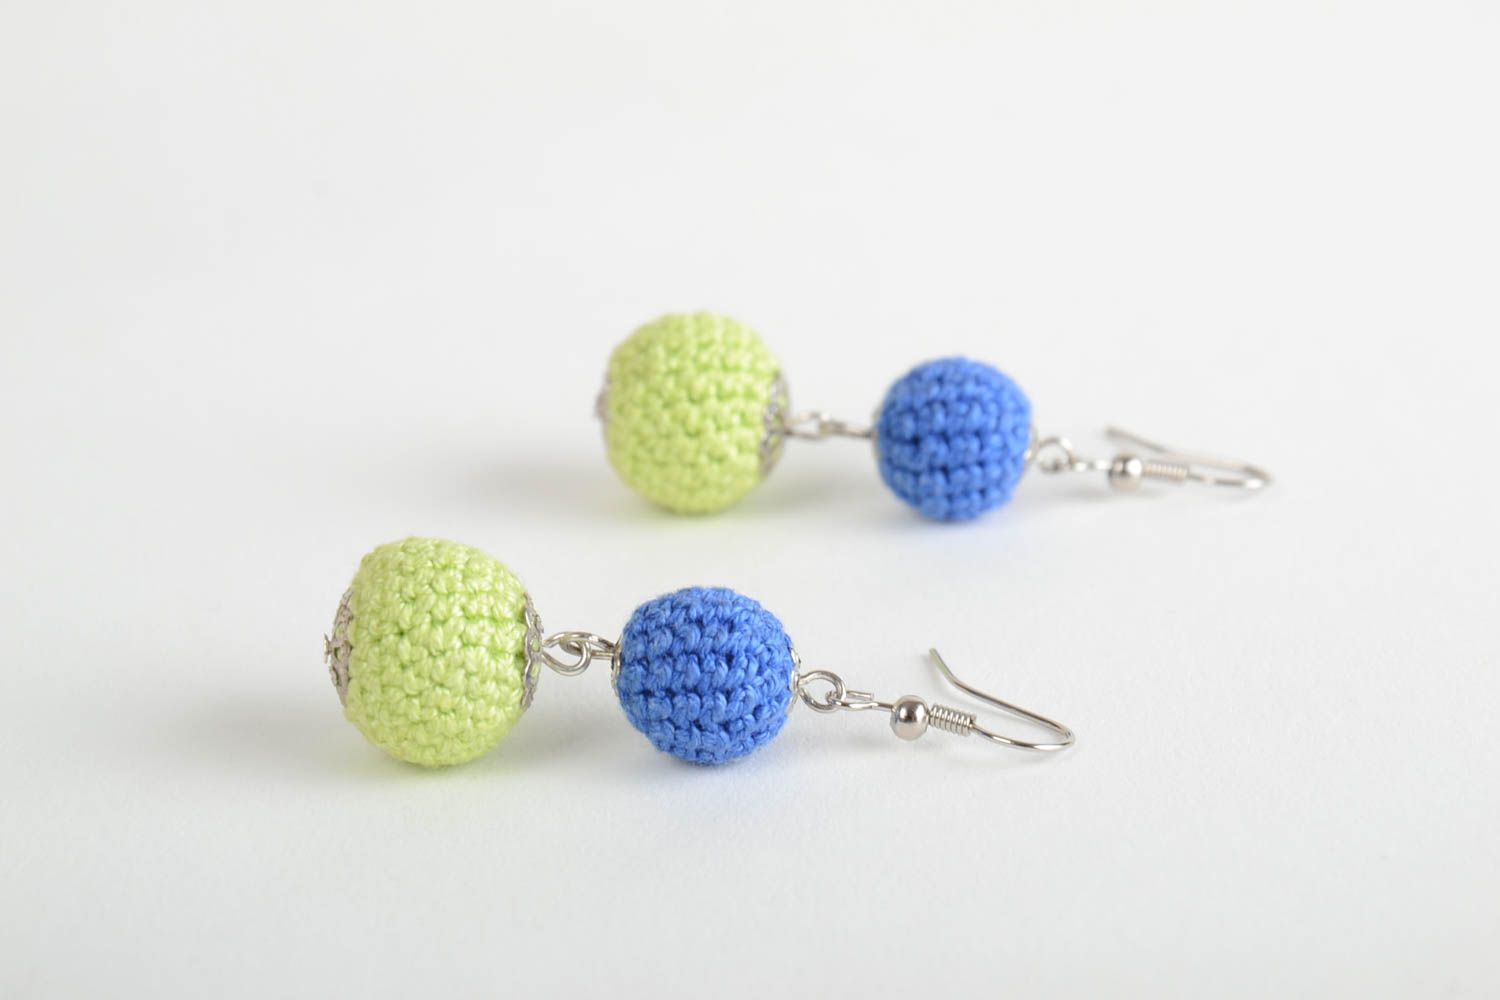 Handmade earrings with beads crocheted over with yellow and blue threads photo 5